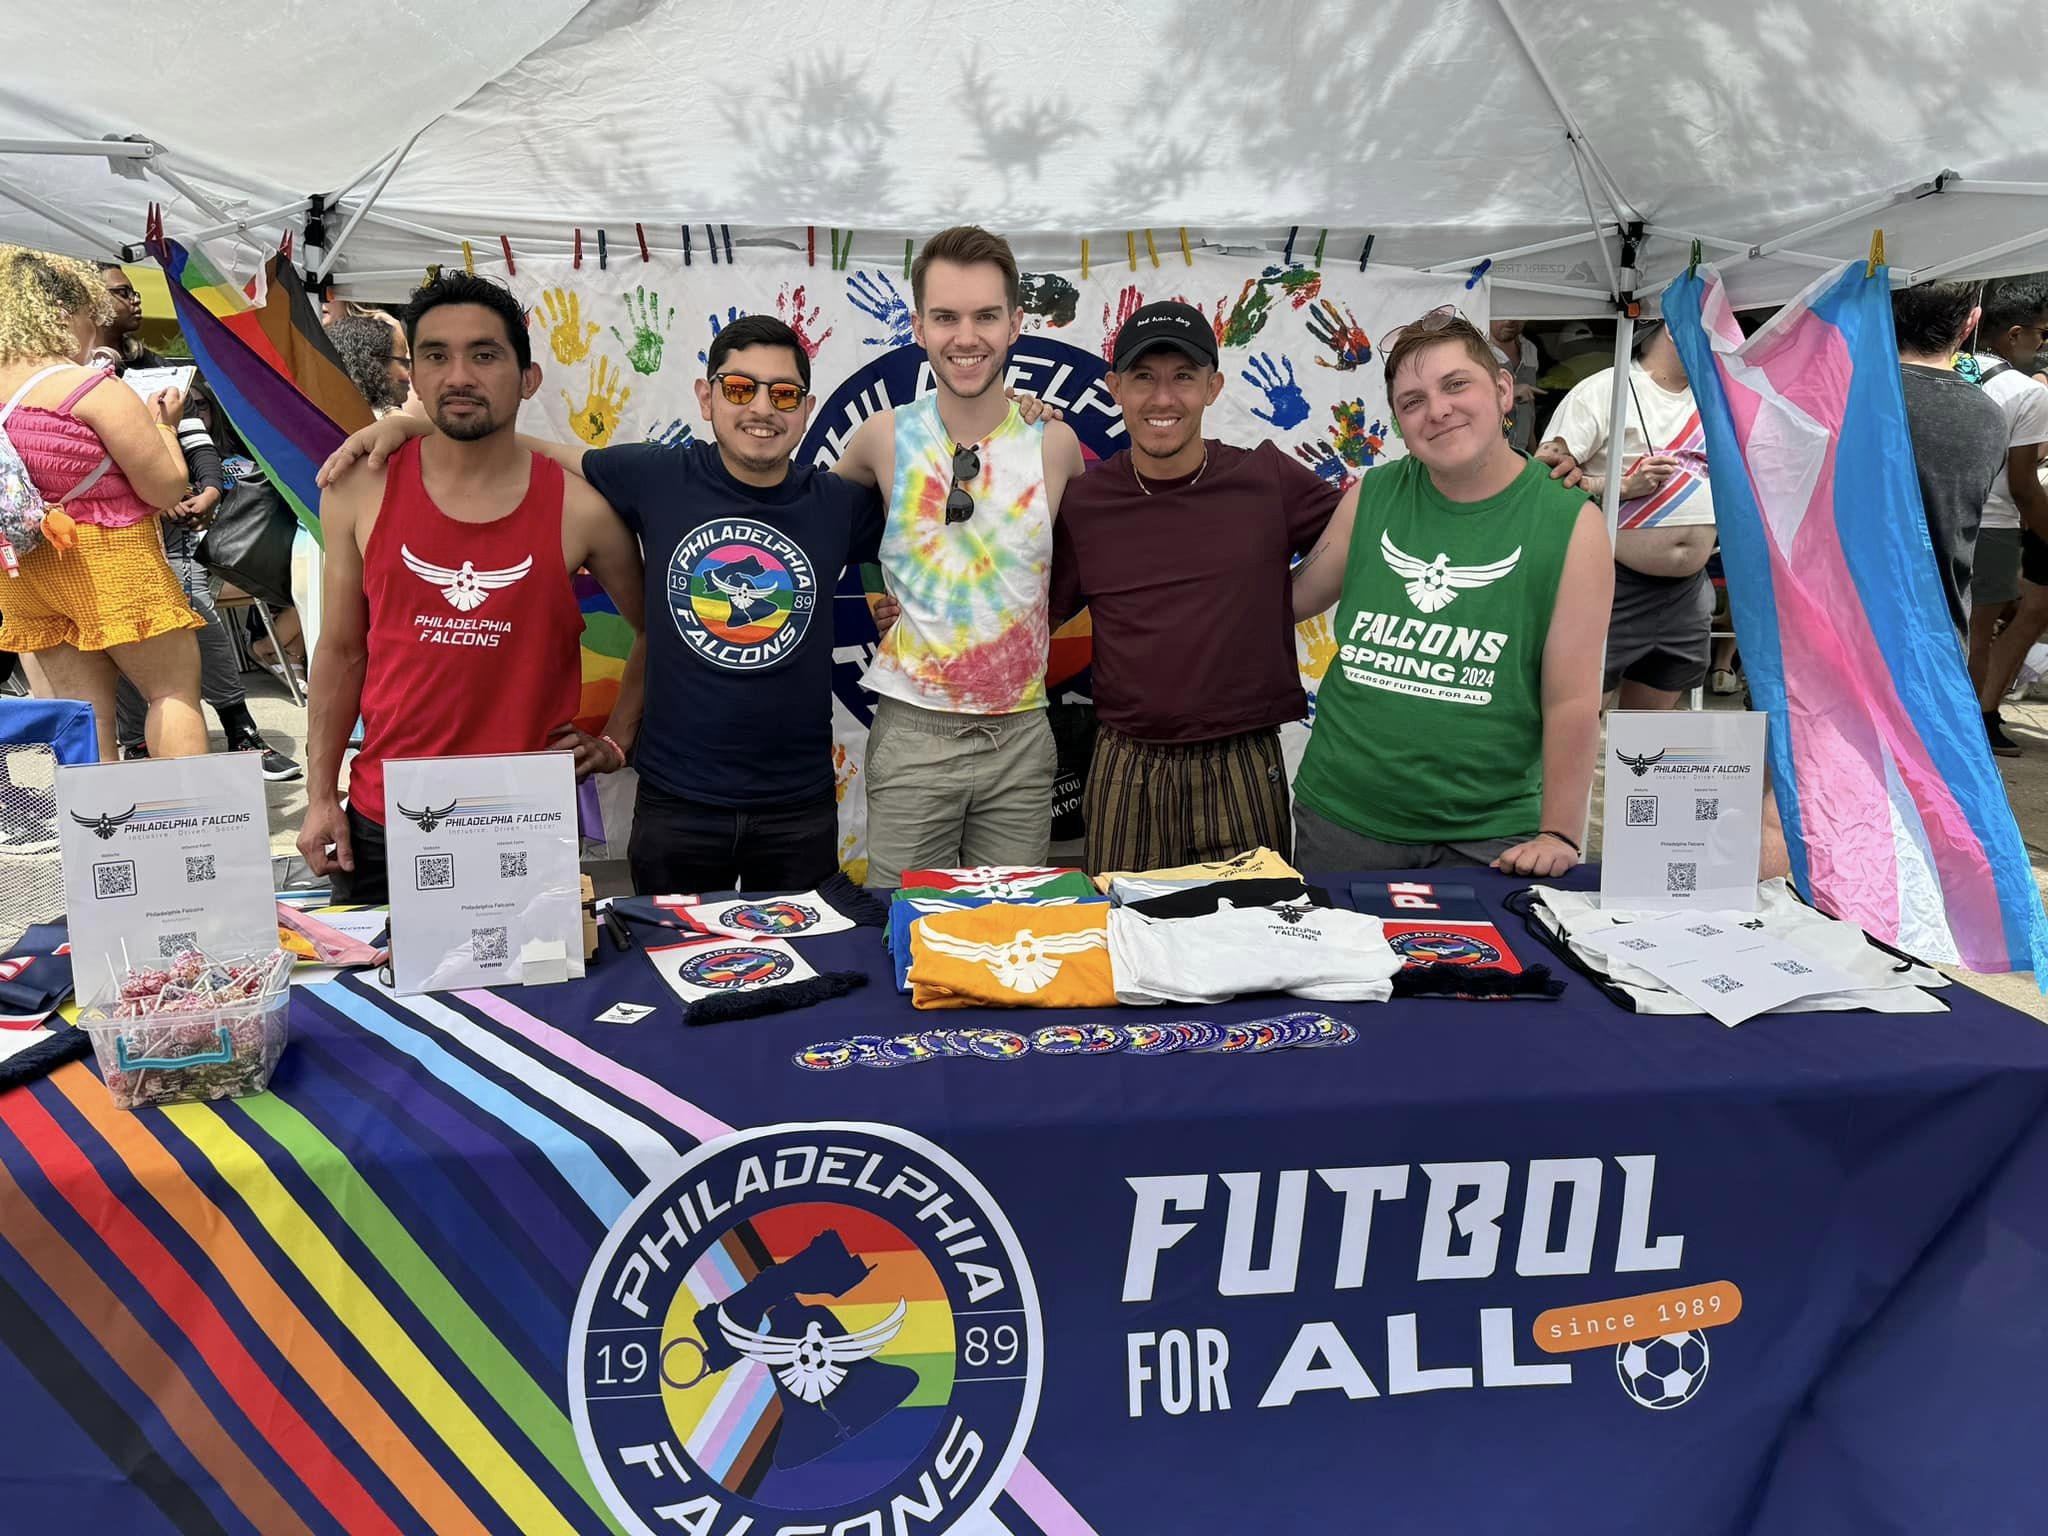 Falcons at Philly Pride